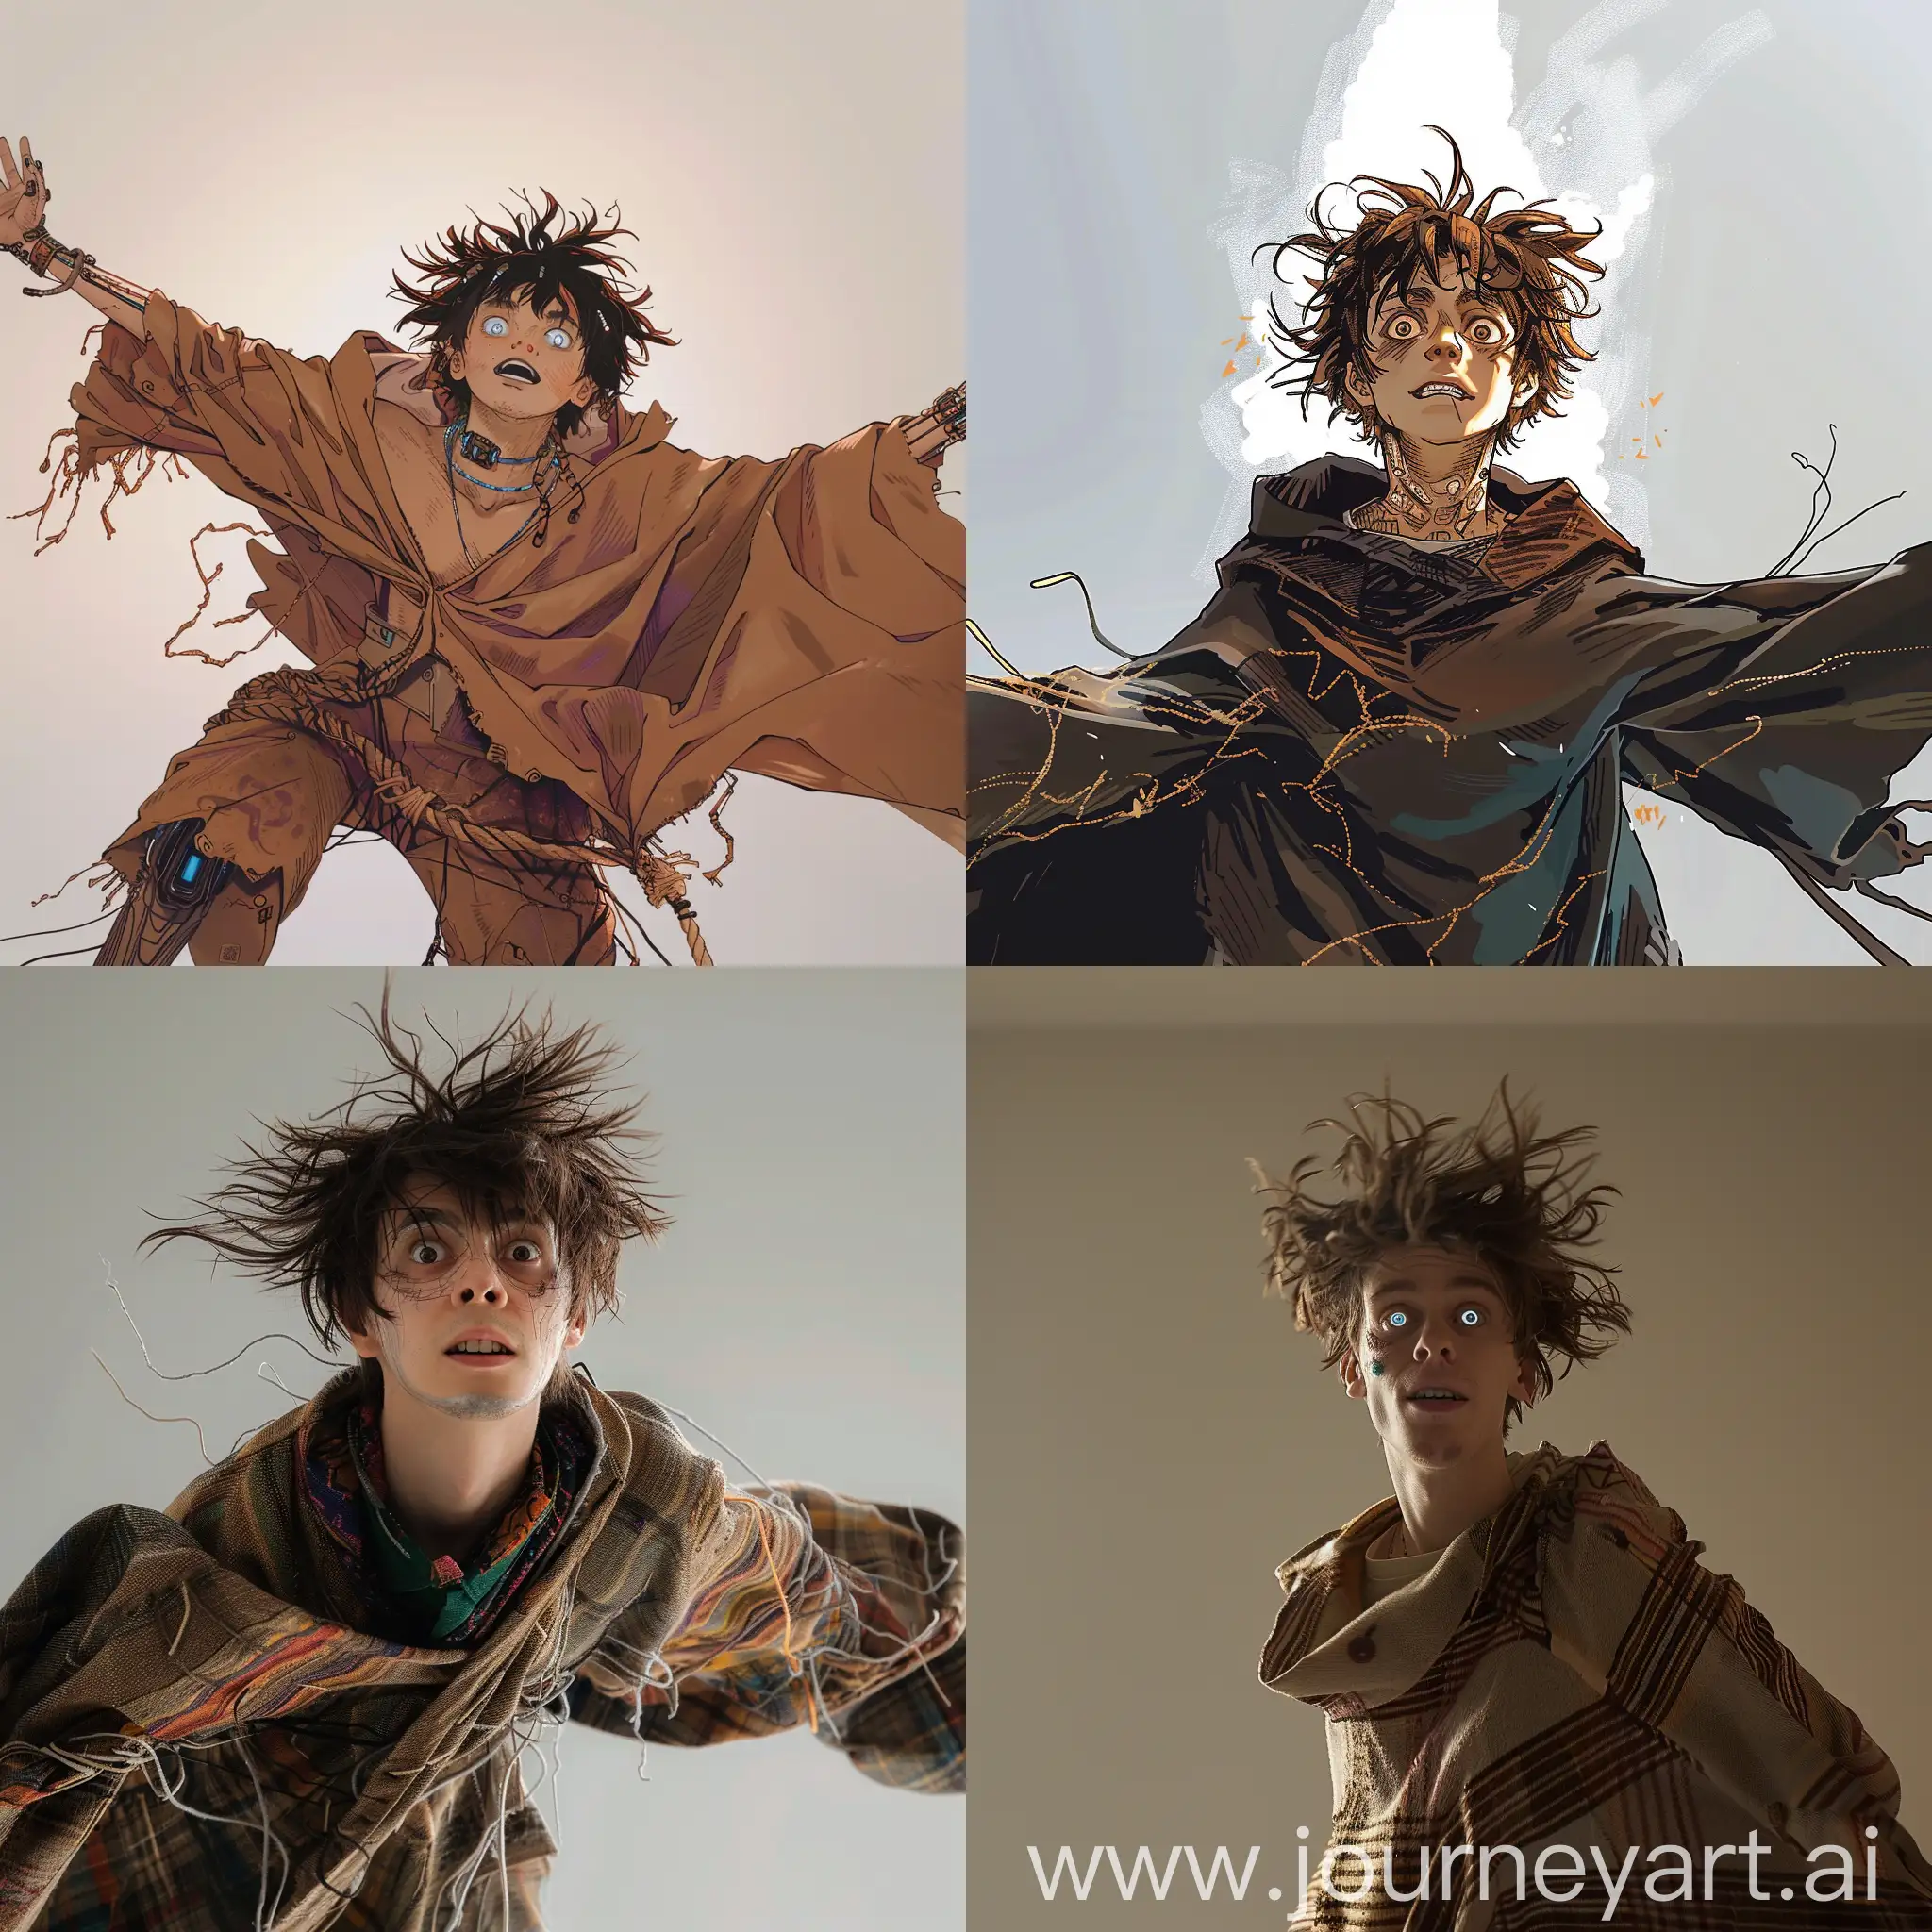 Man with messy short brown hair STUCK UP (( SKIN FADE)) as cybernetics god (((levitating in air)) with tulum poncho clothing (looking crazy WIDE EYED SMILE))) ((ANIME STYLE))